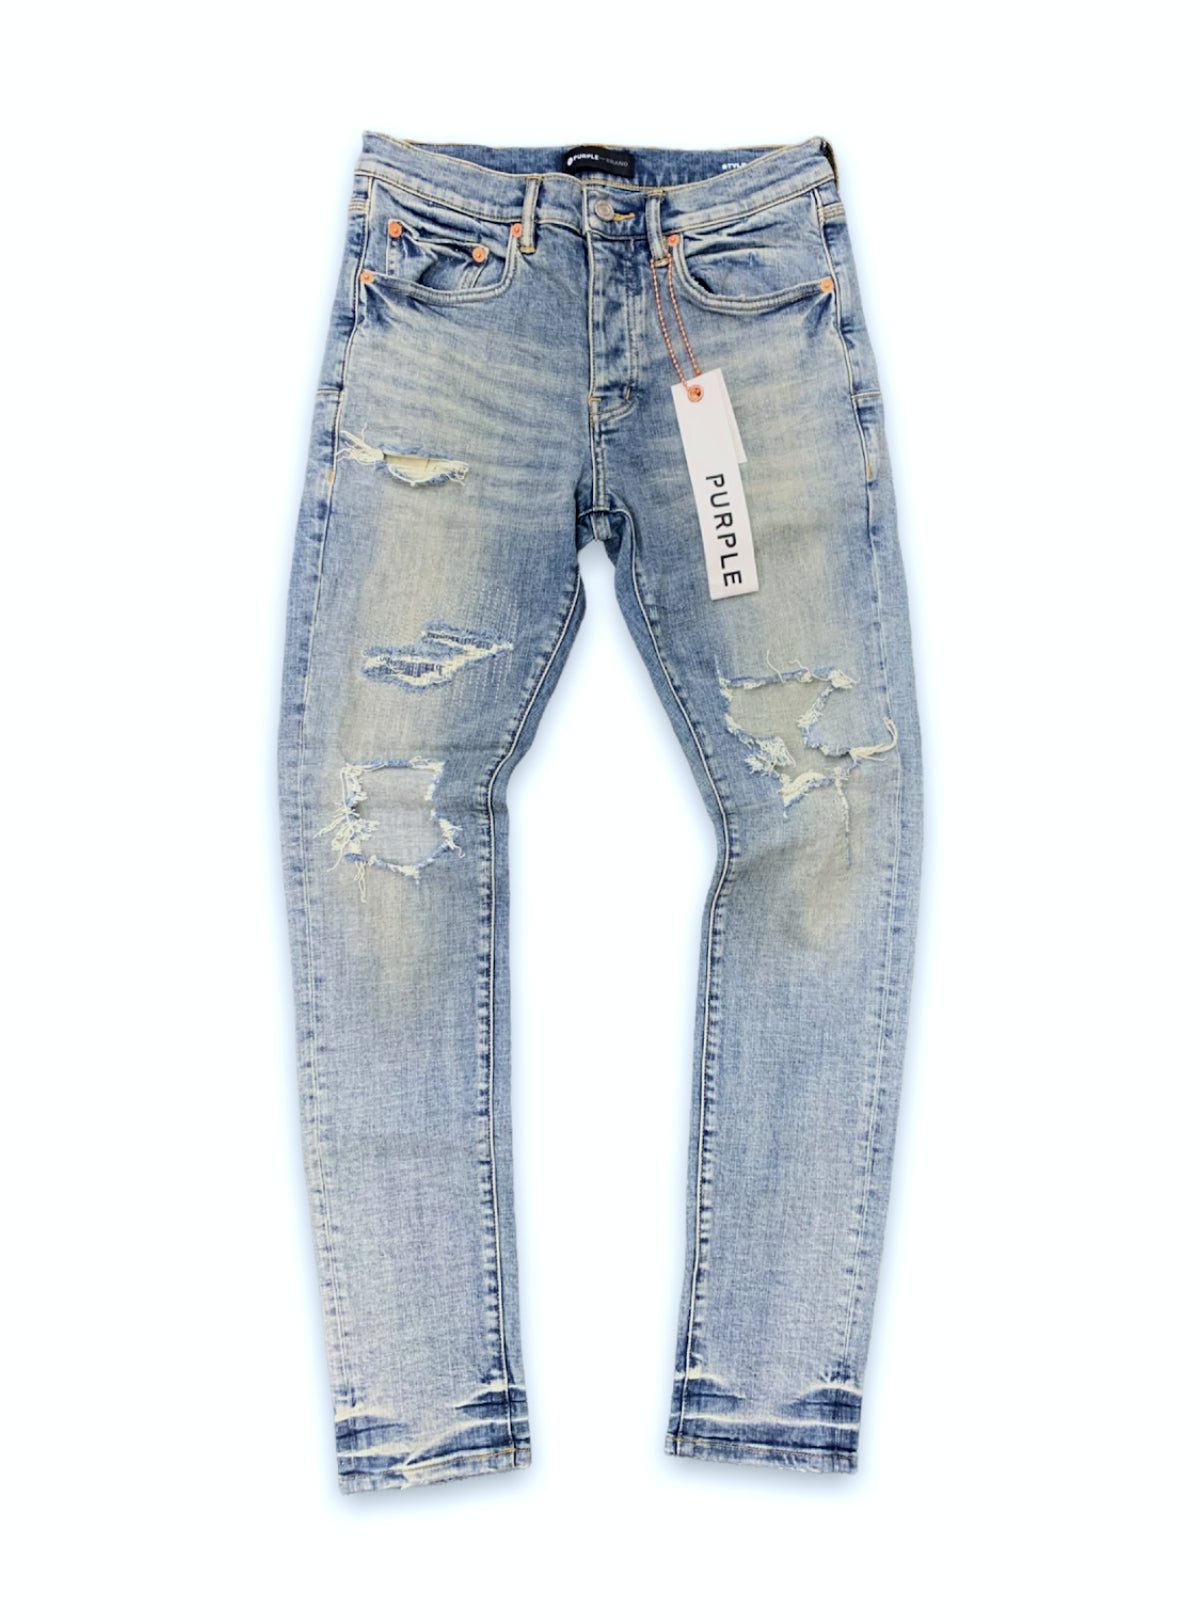 Purple-Brand Jeans - Distressed Dirty Blowout - Grey - P001